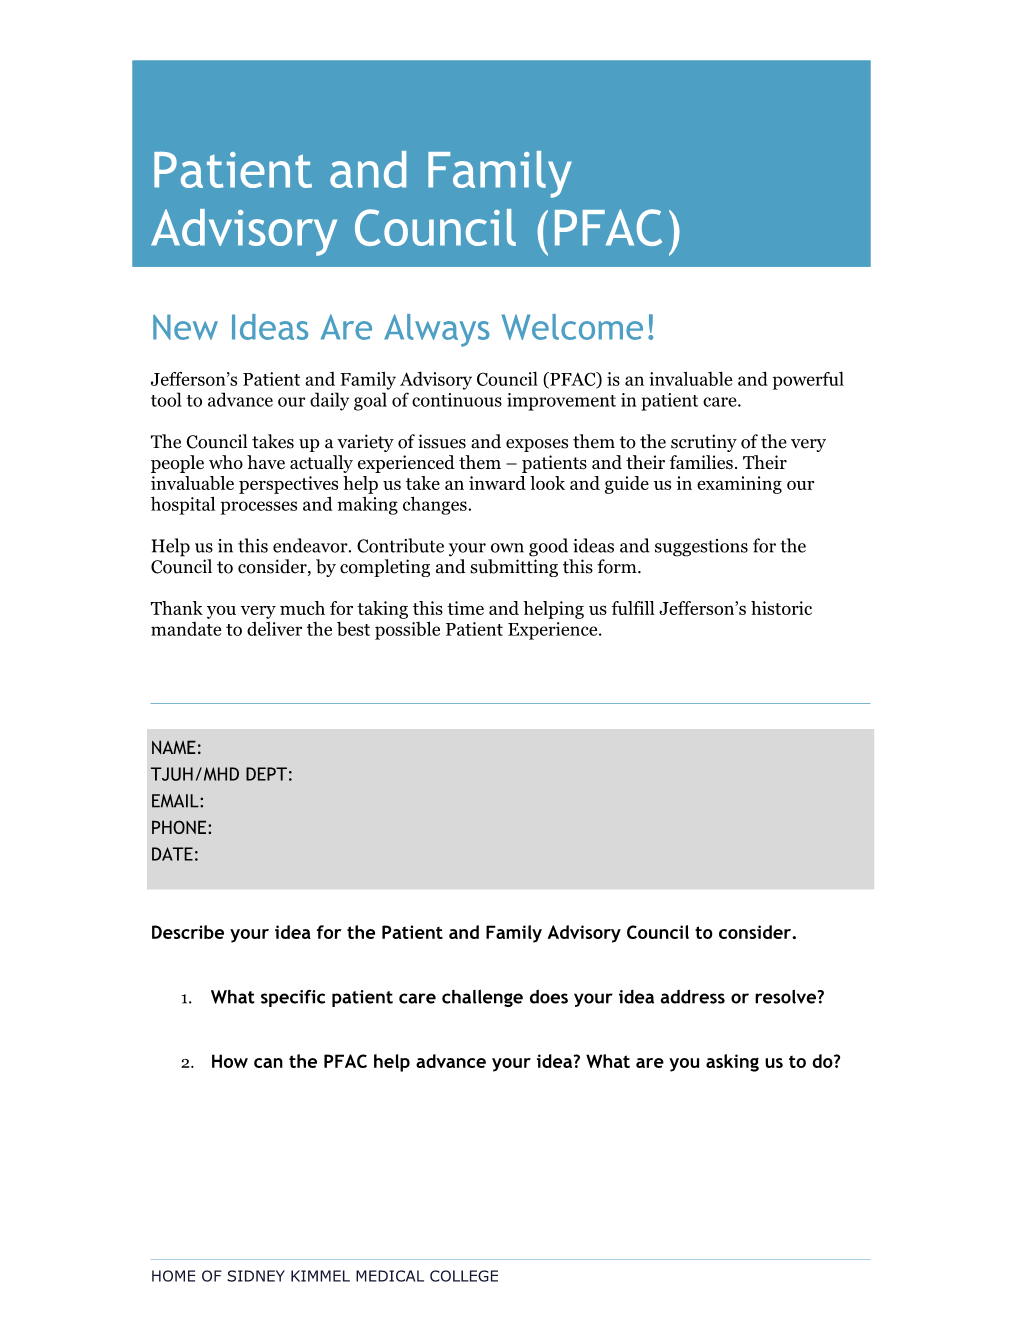 Patient and Family Advisory Council New Ideas Form